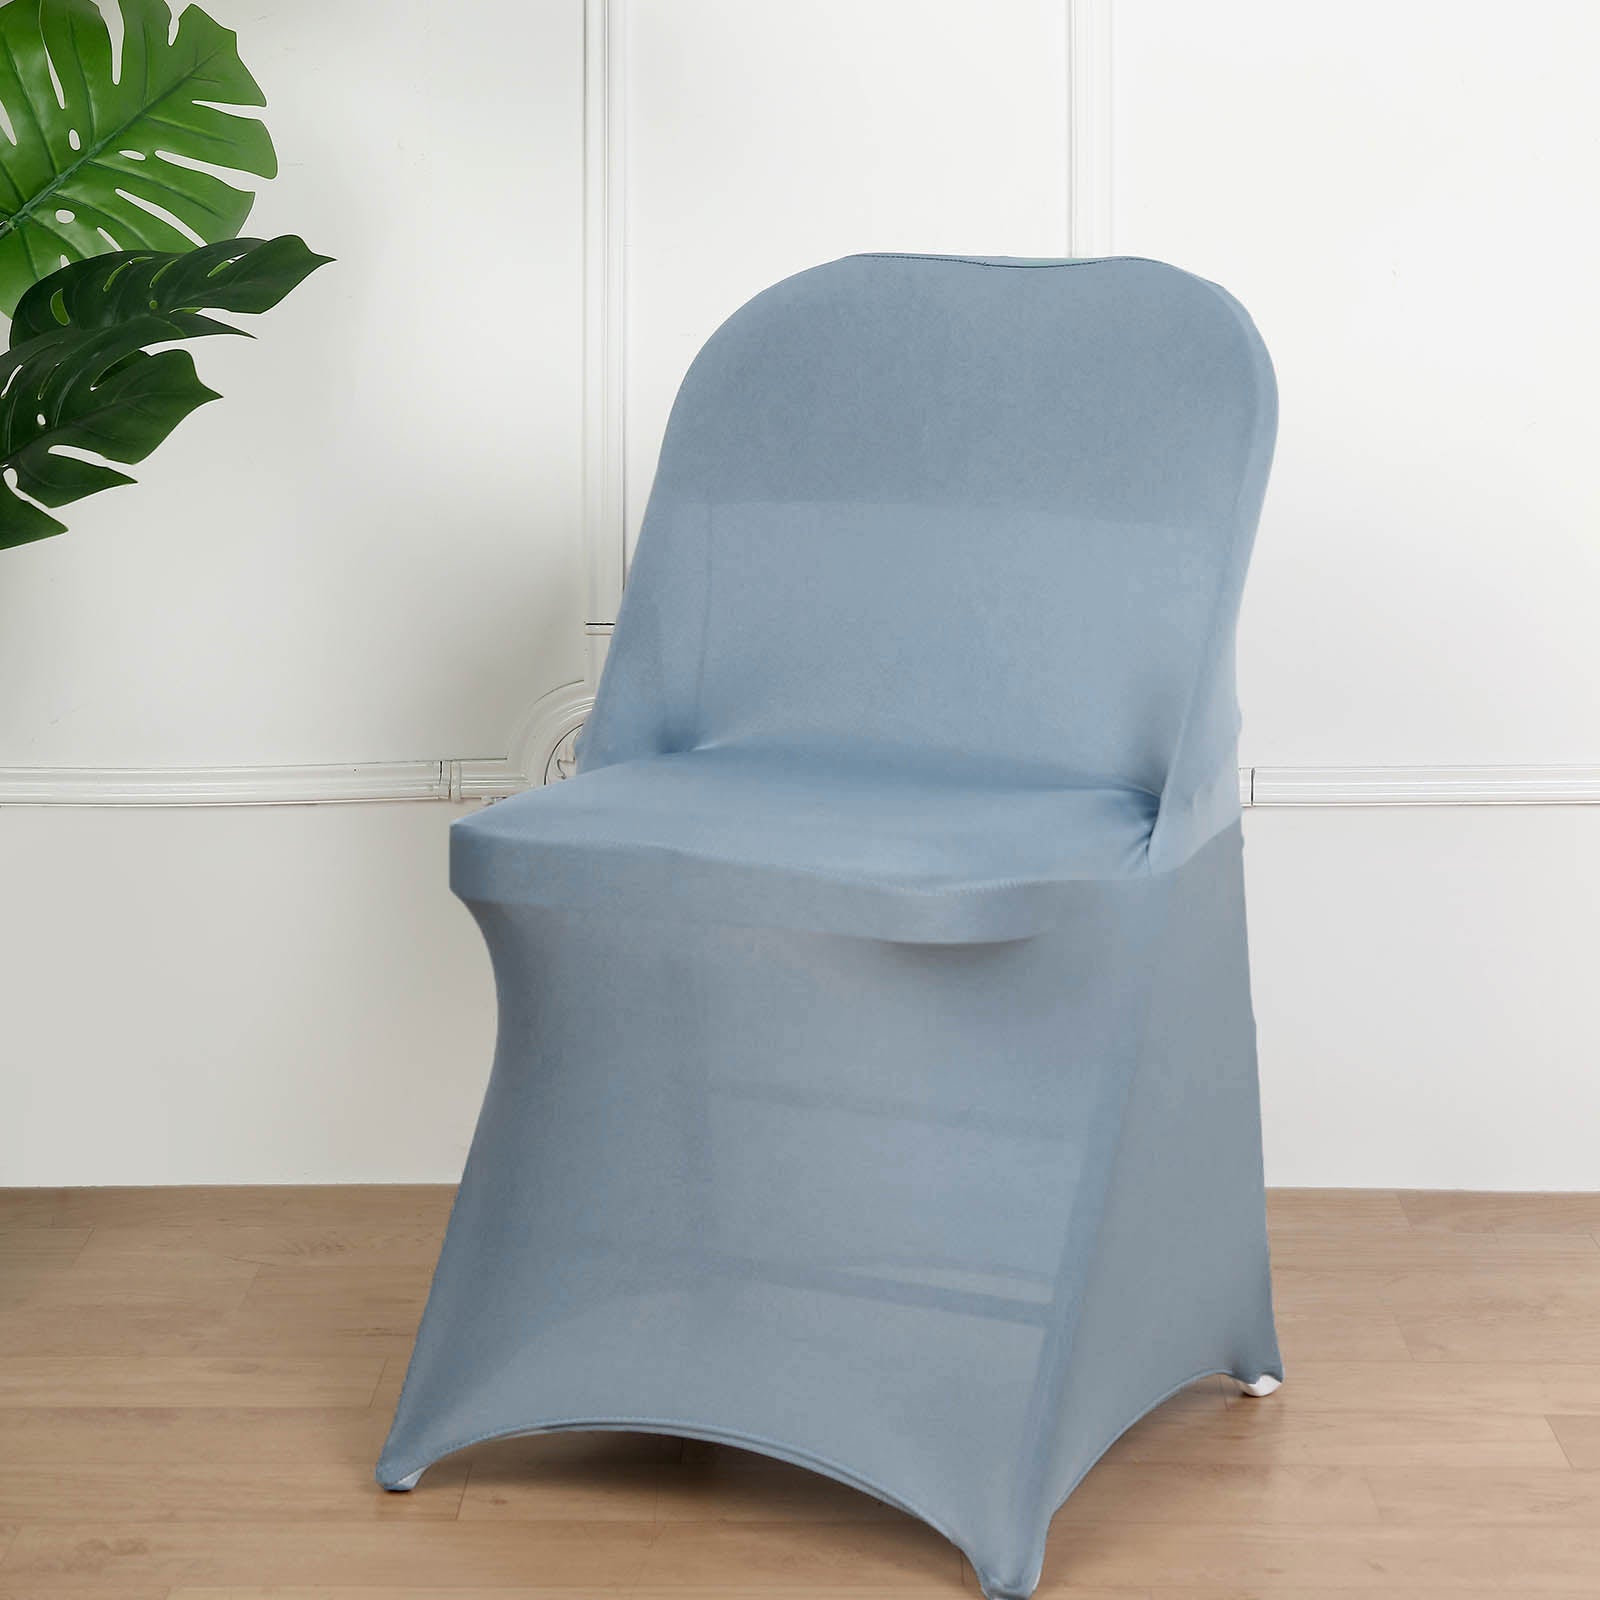 Baby Blue Lifetime Folding Spandex Chair Covers, Stretch Lycra